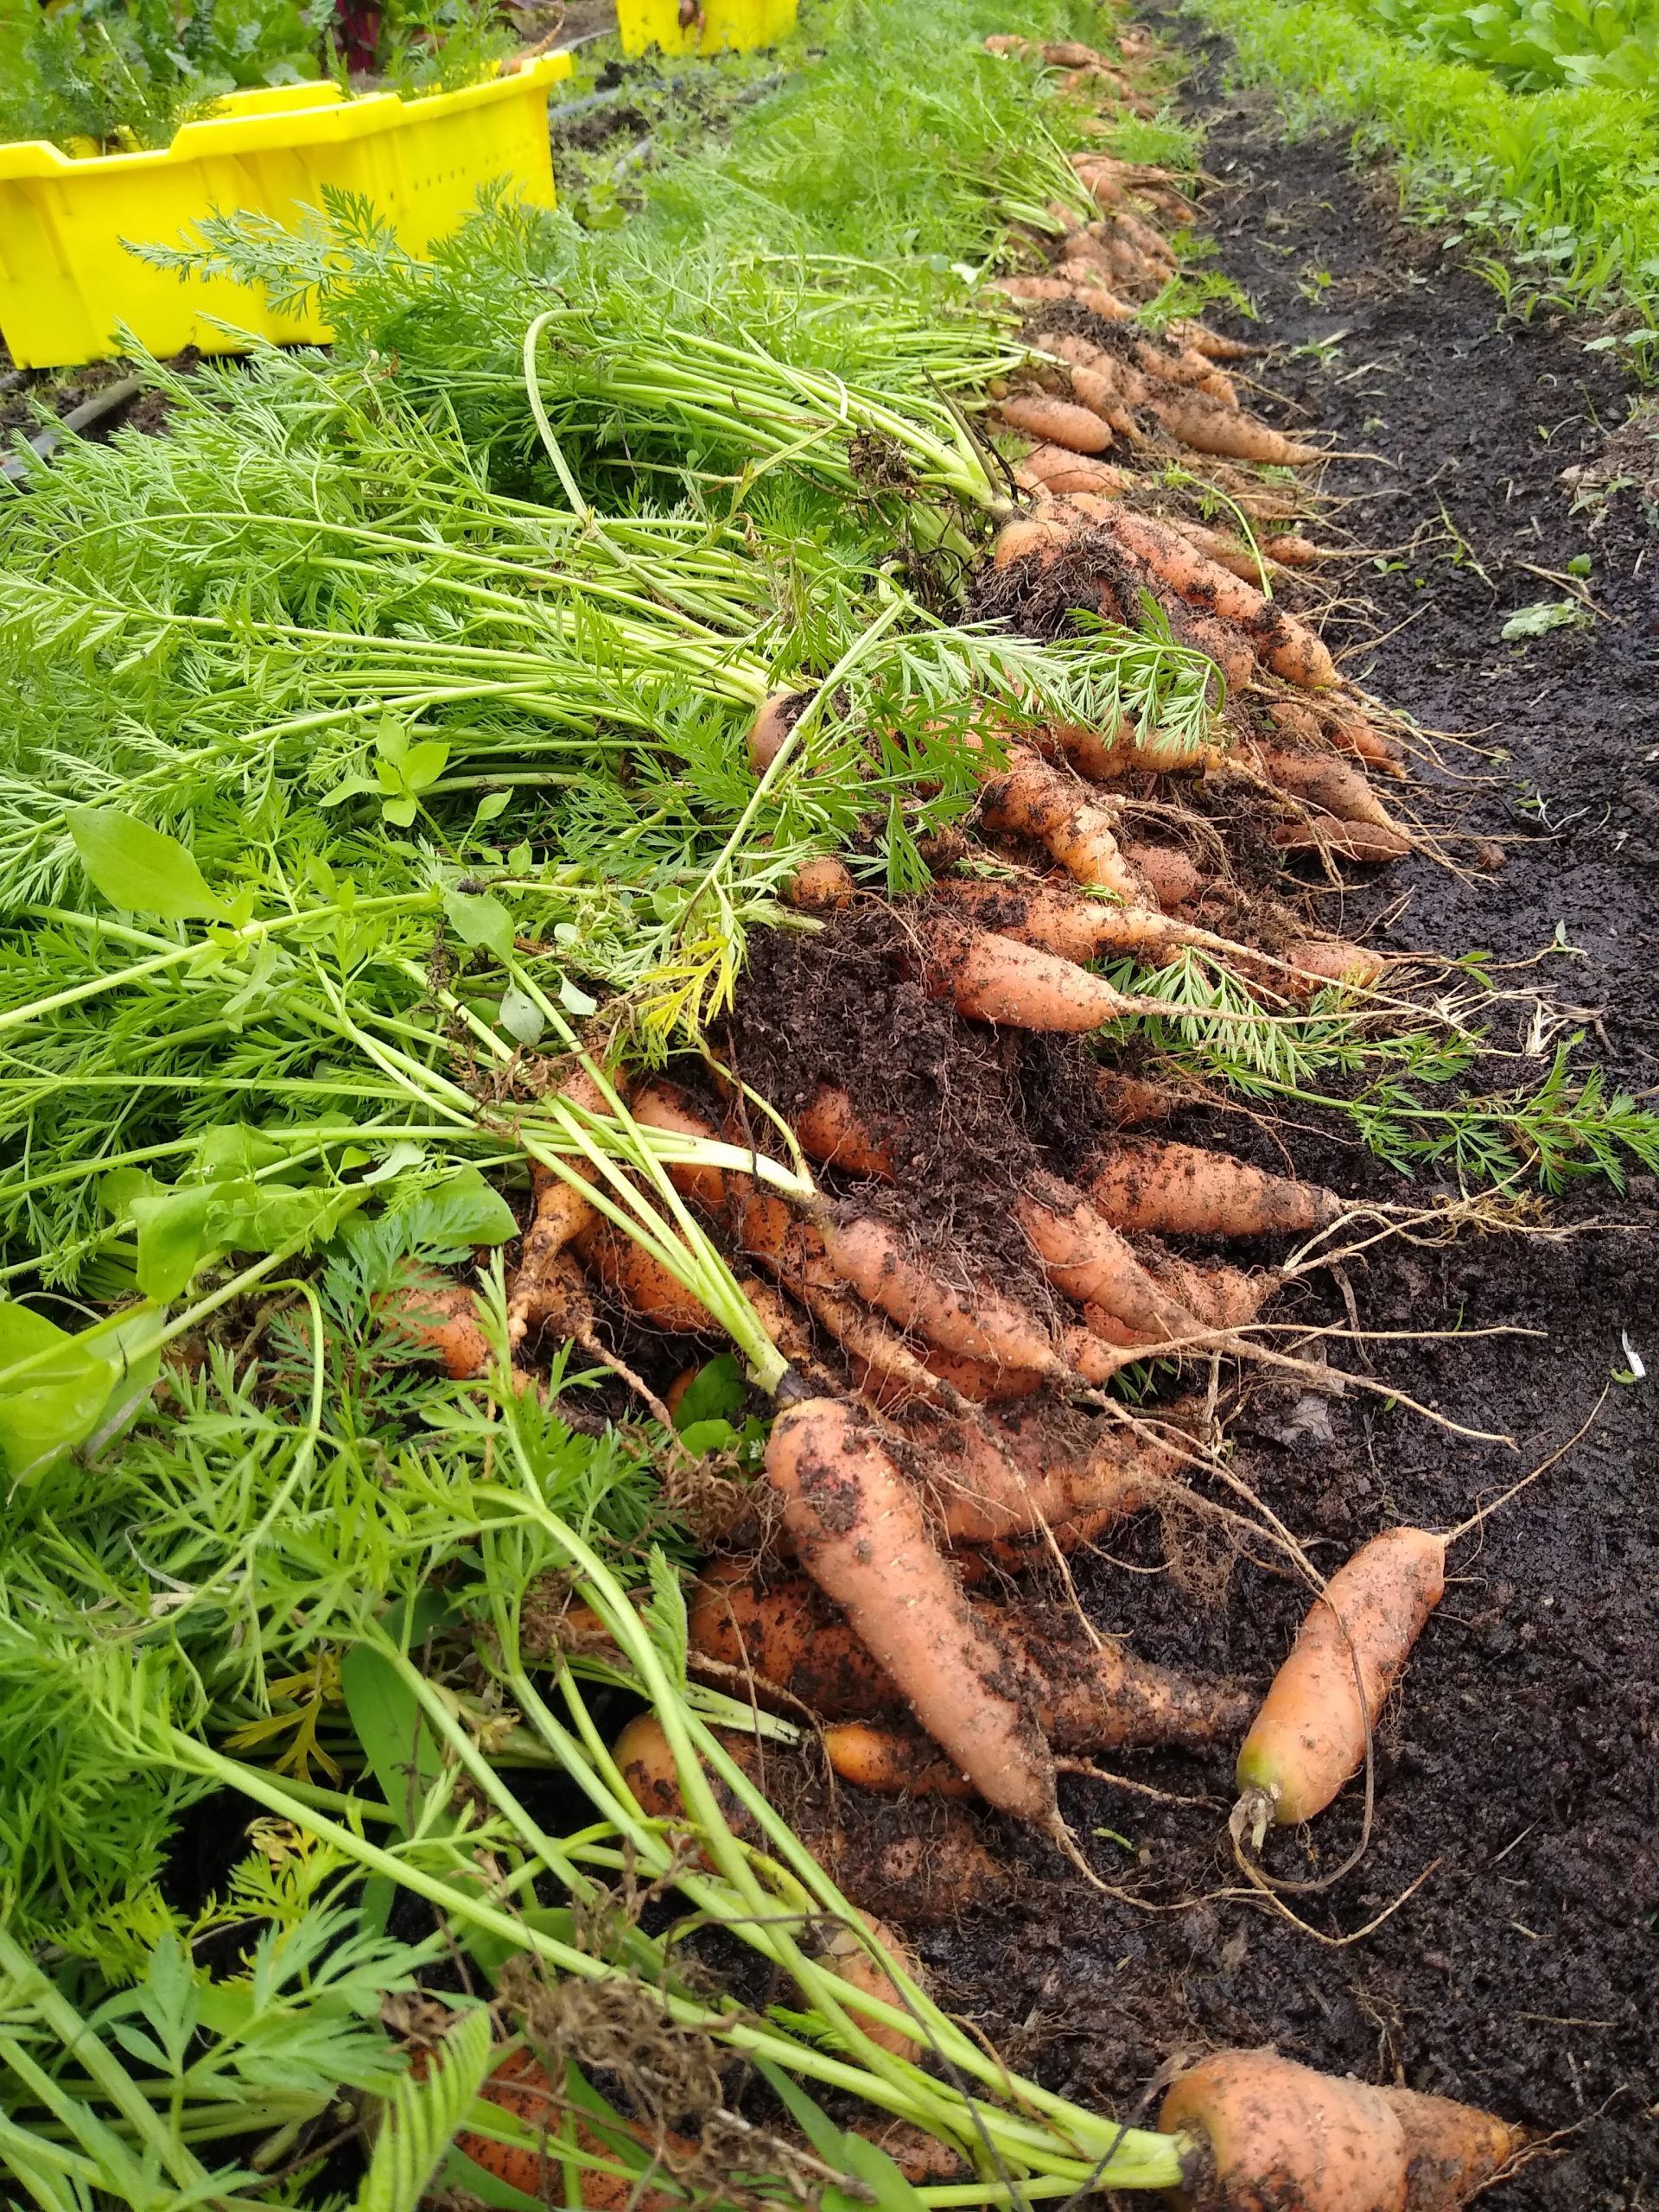 a row of harvested carrots laying on dark soil